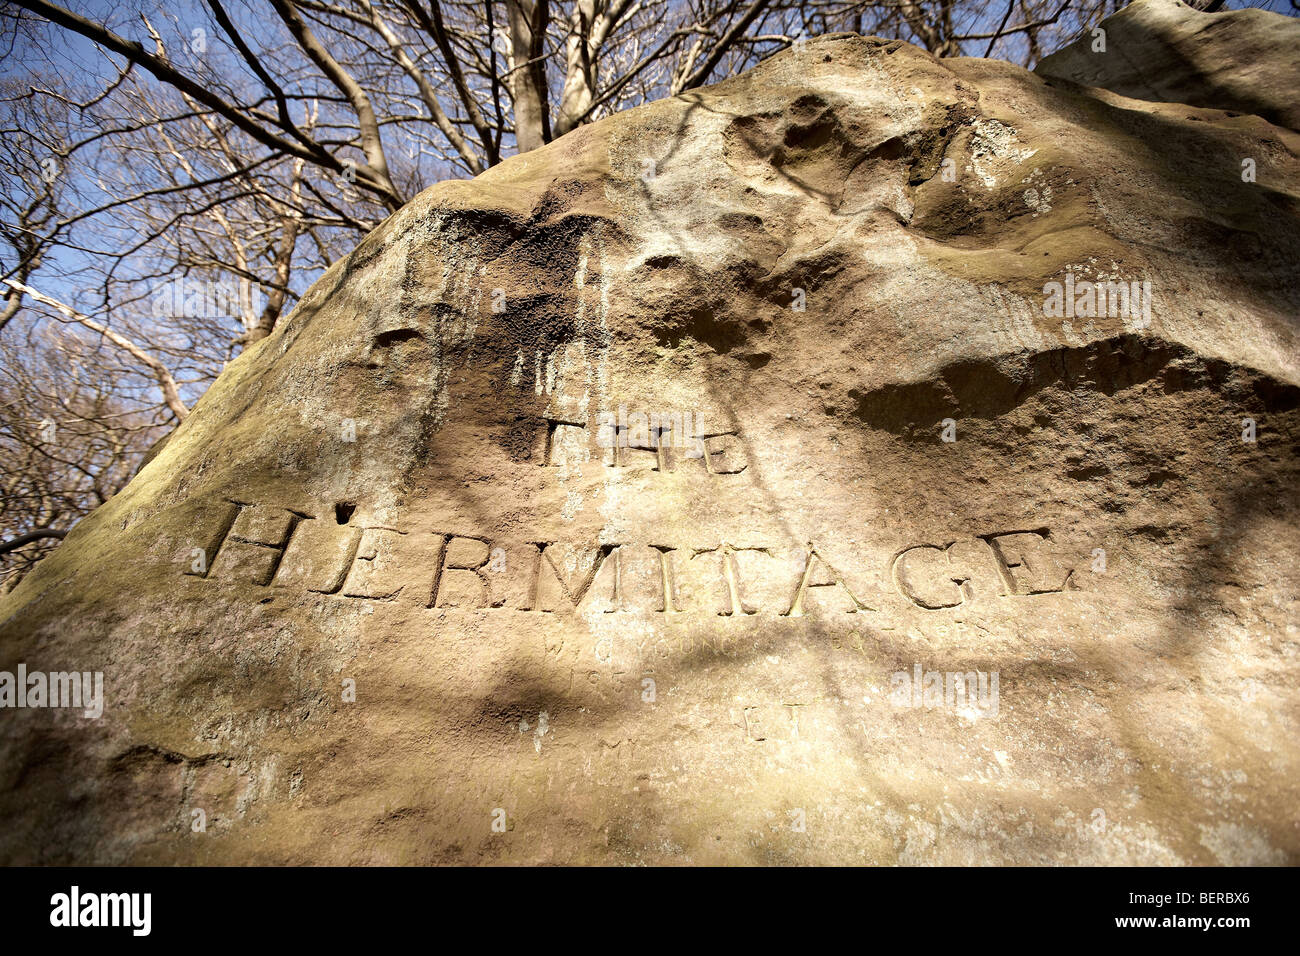 The Hermitage folly carved from solid rock, Sneaton Wood, near falling foss, North Yorkshire, UK Stock Photo